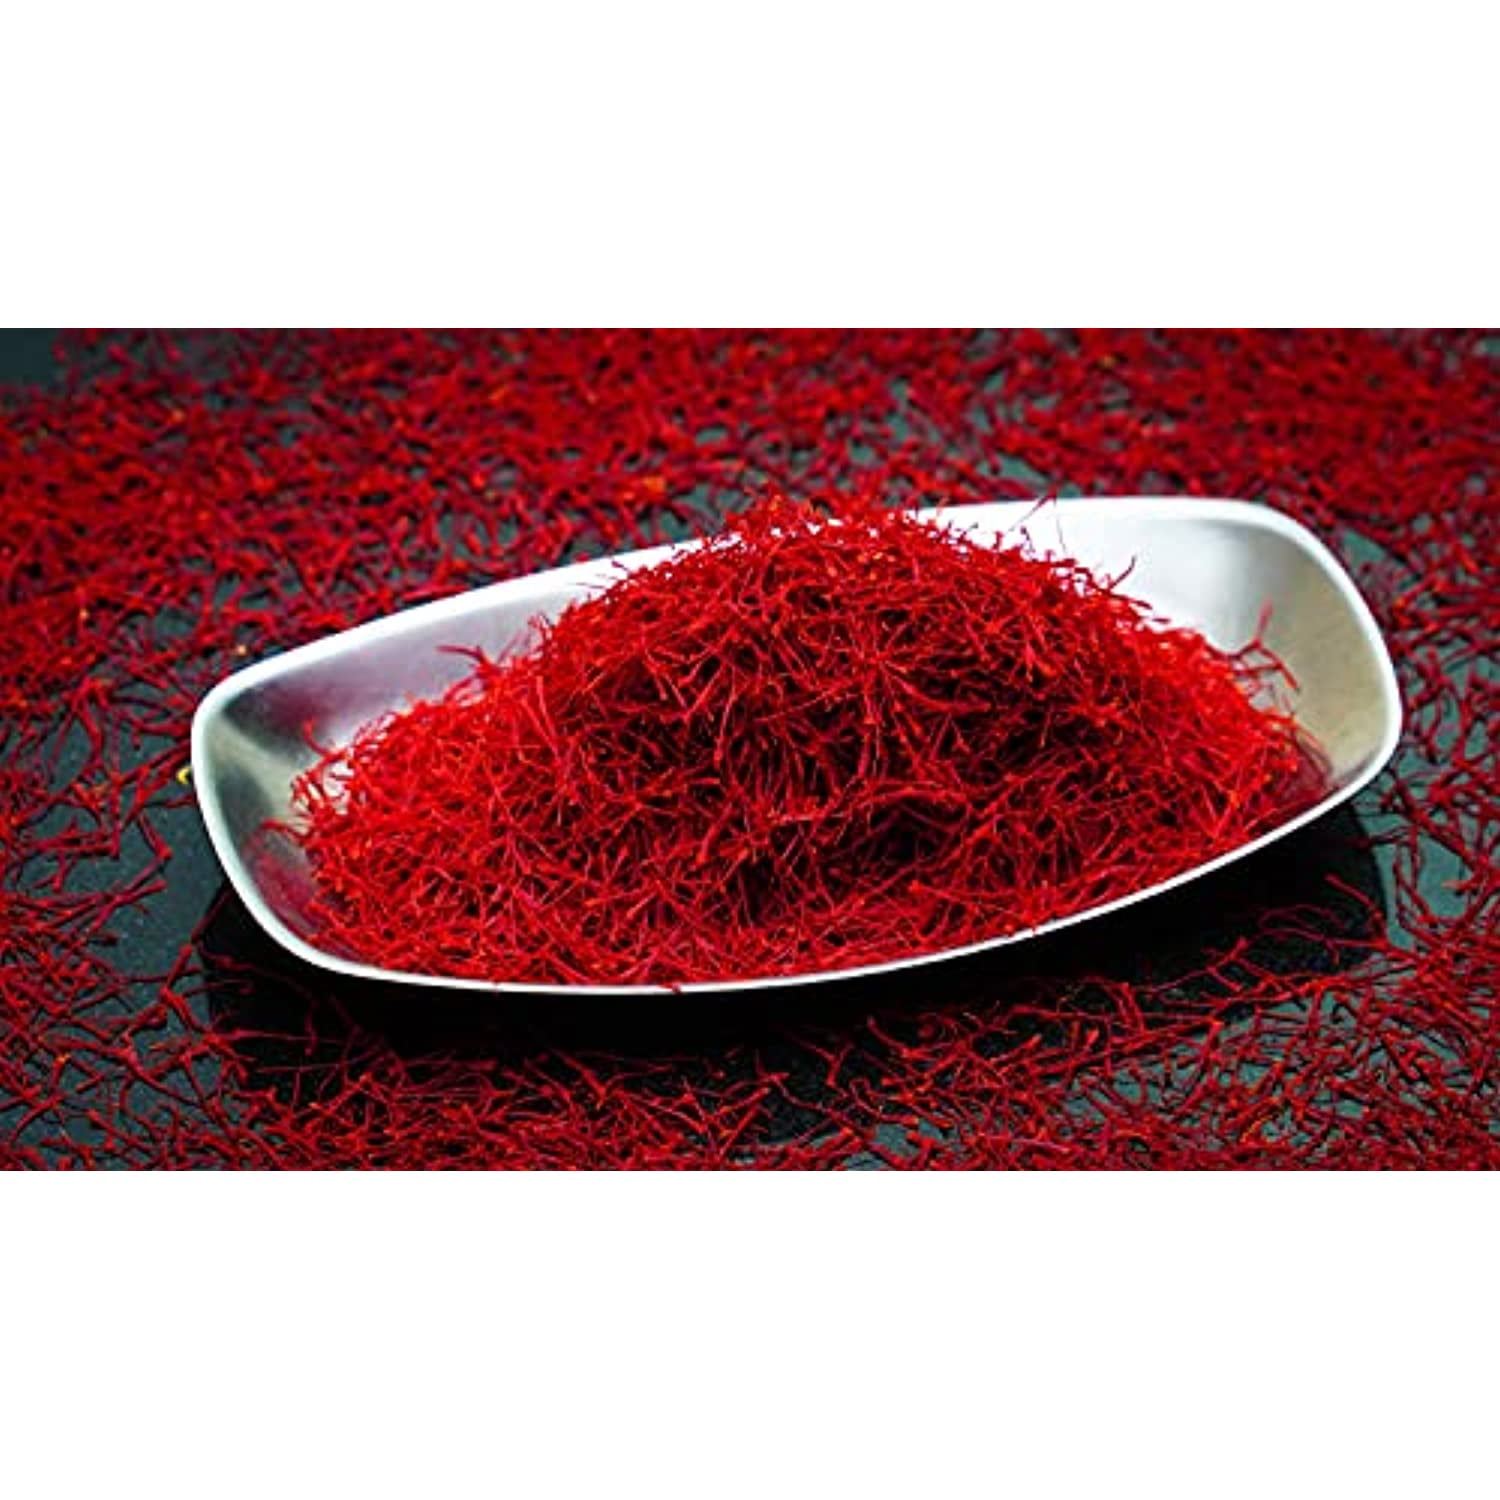 Genuine Deep Red Saffron Threads 0.125 Grams in Bags 100% TIP QUALITY  Inexpensiv